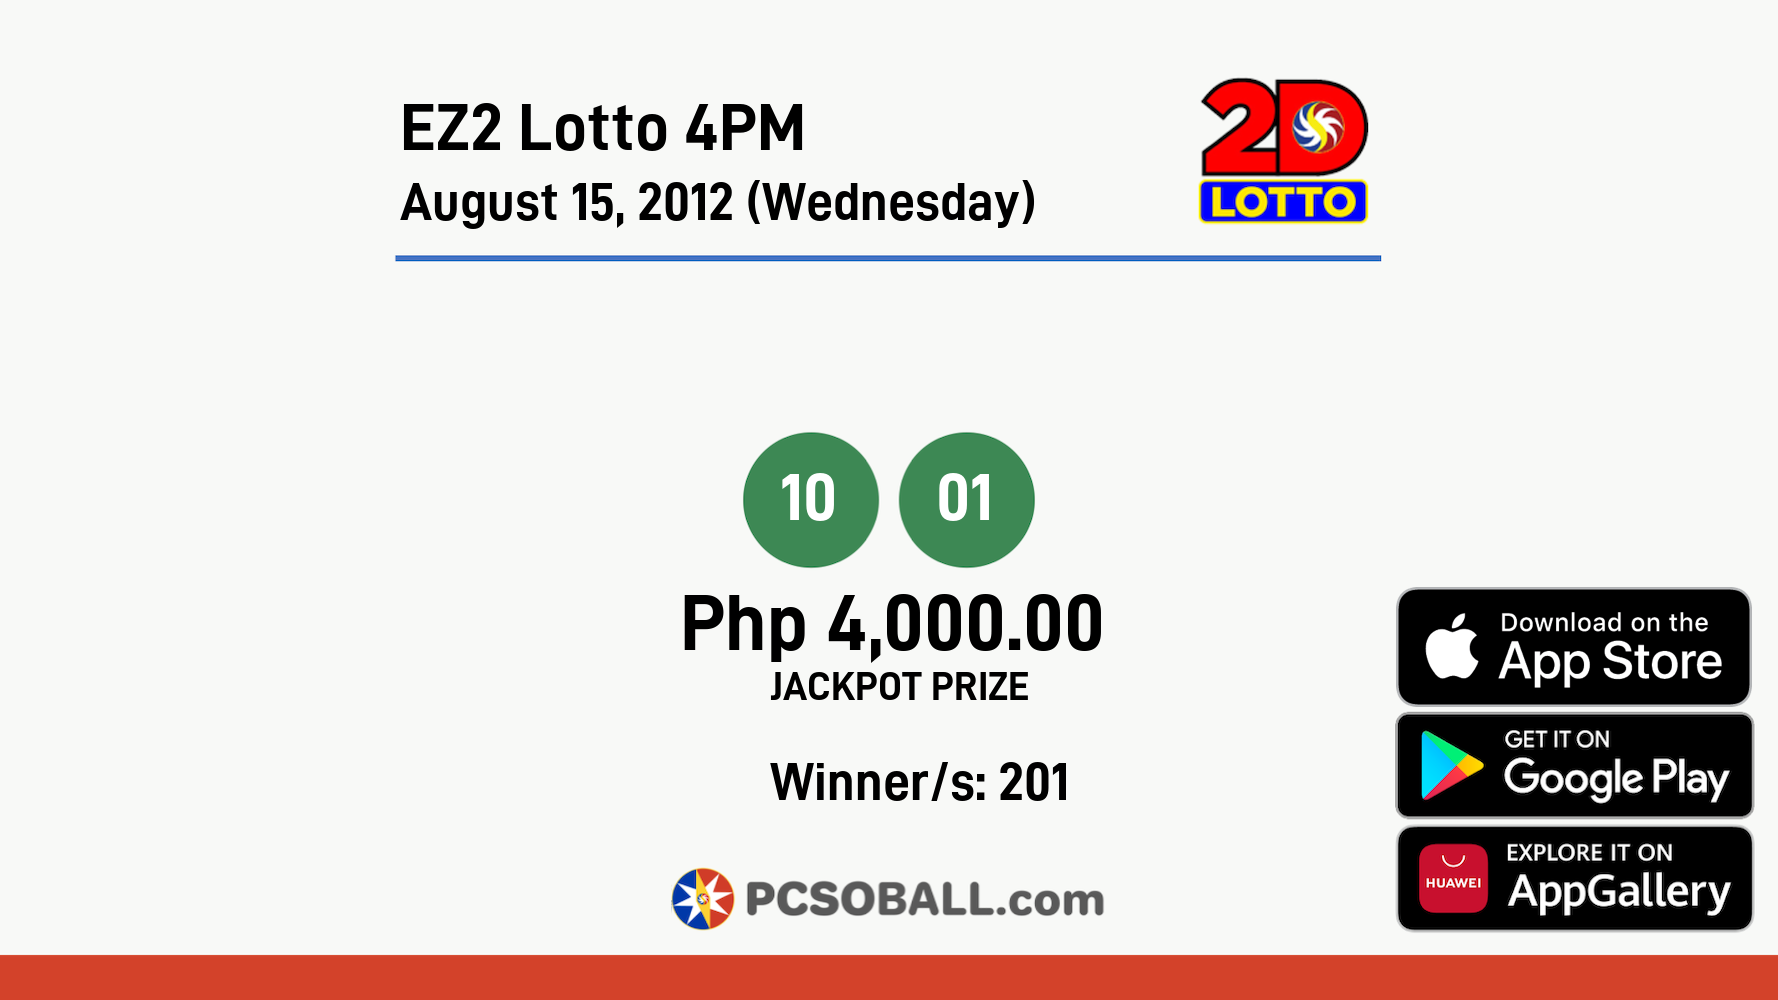 EZ2 Lotto 4PM August 15, 2012 (Wednesday) Result